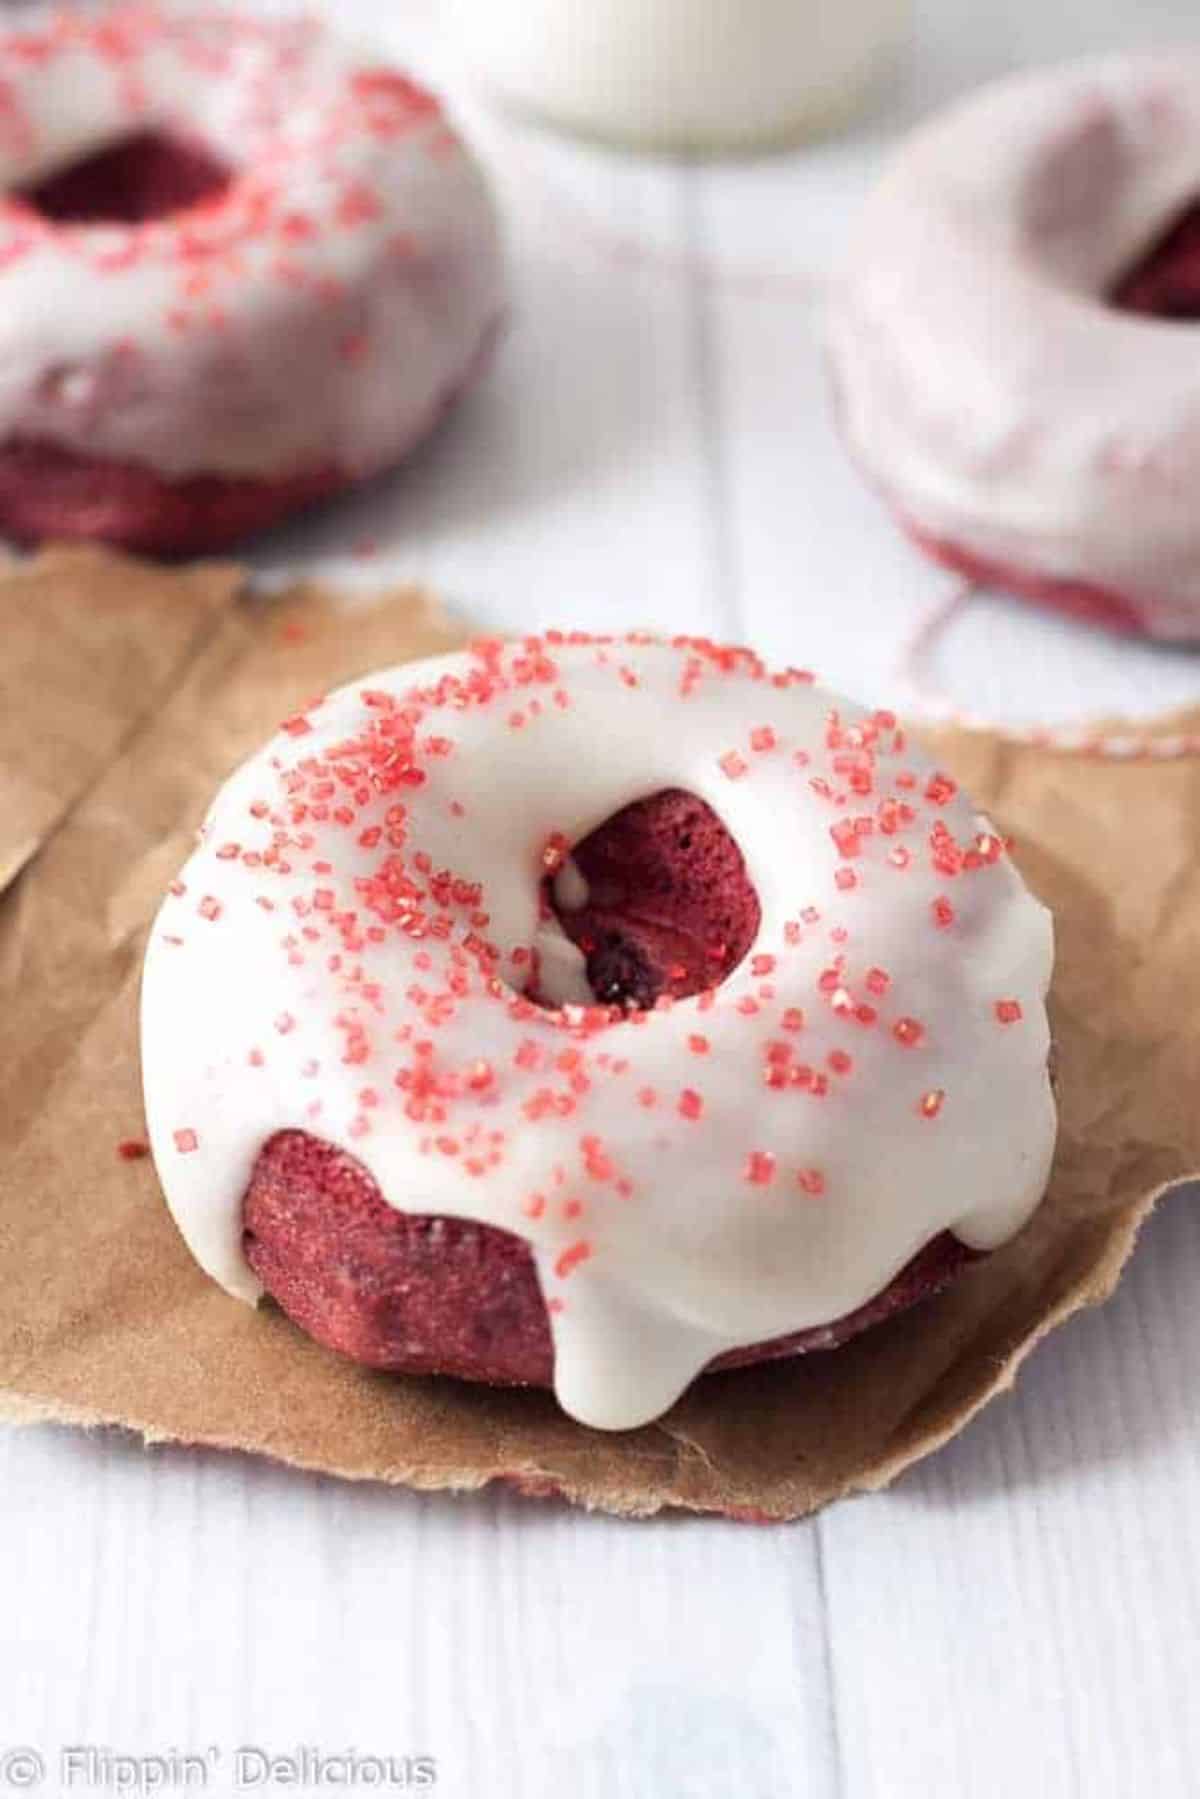 A delicious Red Velvet Doughnut on a piece of paper.